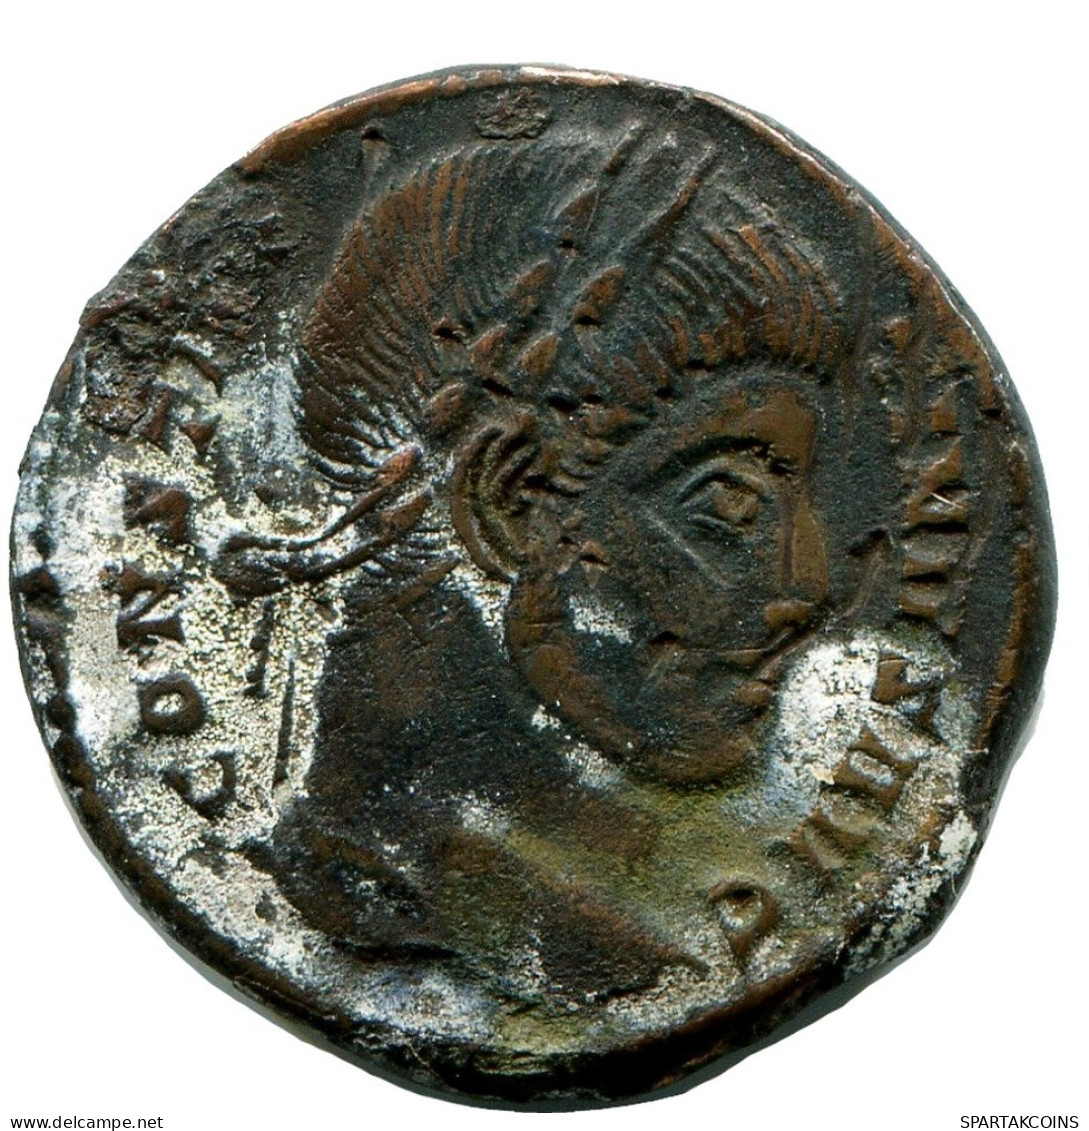 CONSTANTINE I MINTED IN TICINUM FROM THE ROYAL ONTARIO MUSEUM #ANC11079.14.F.A - The Christian Empire (307 AD Tot 363 AD)